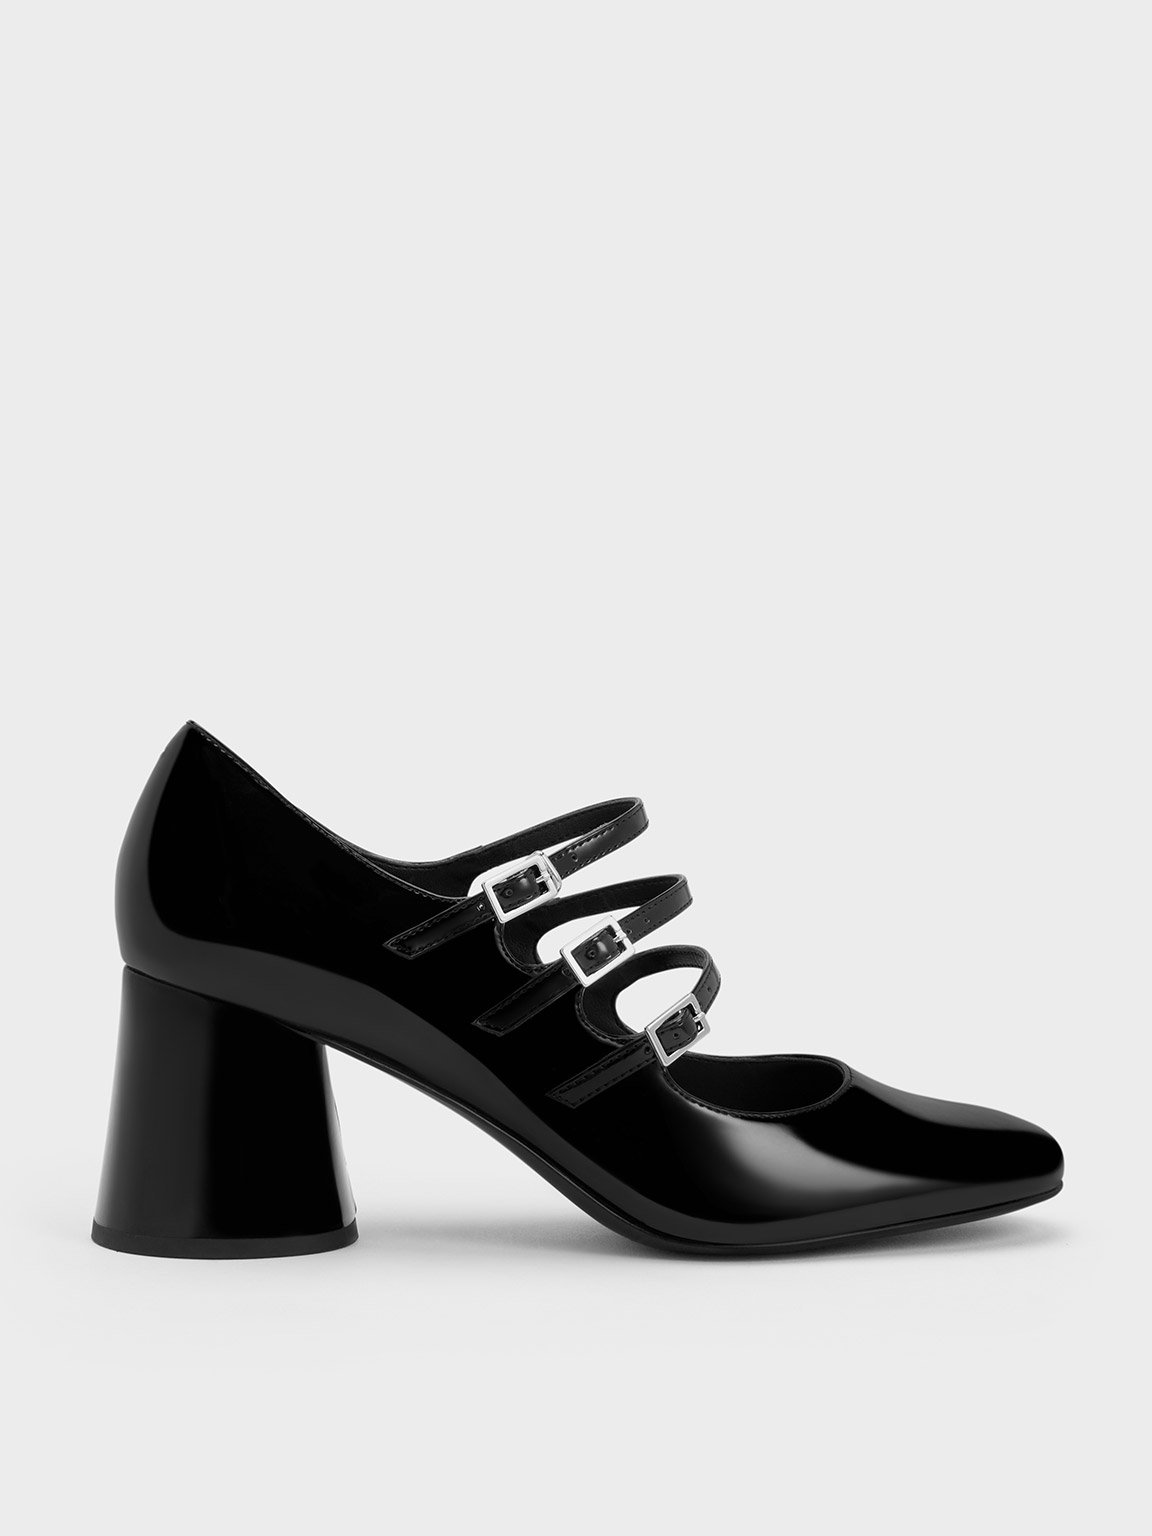 Black Buckled Cylindrical Heel Mary Janes | CHARLES & KEITH